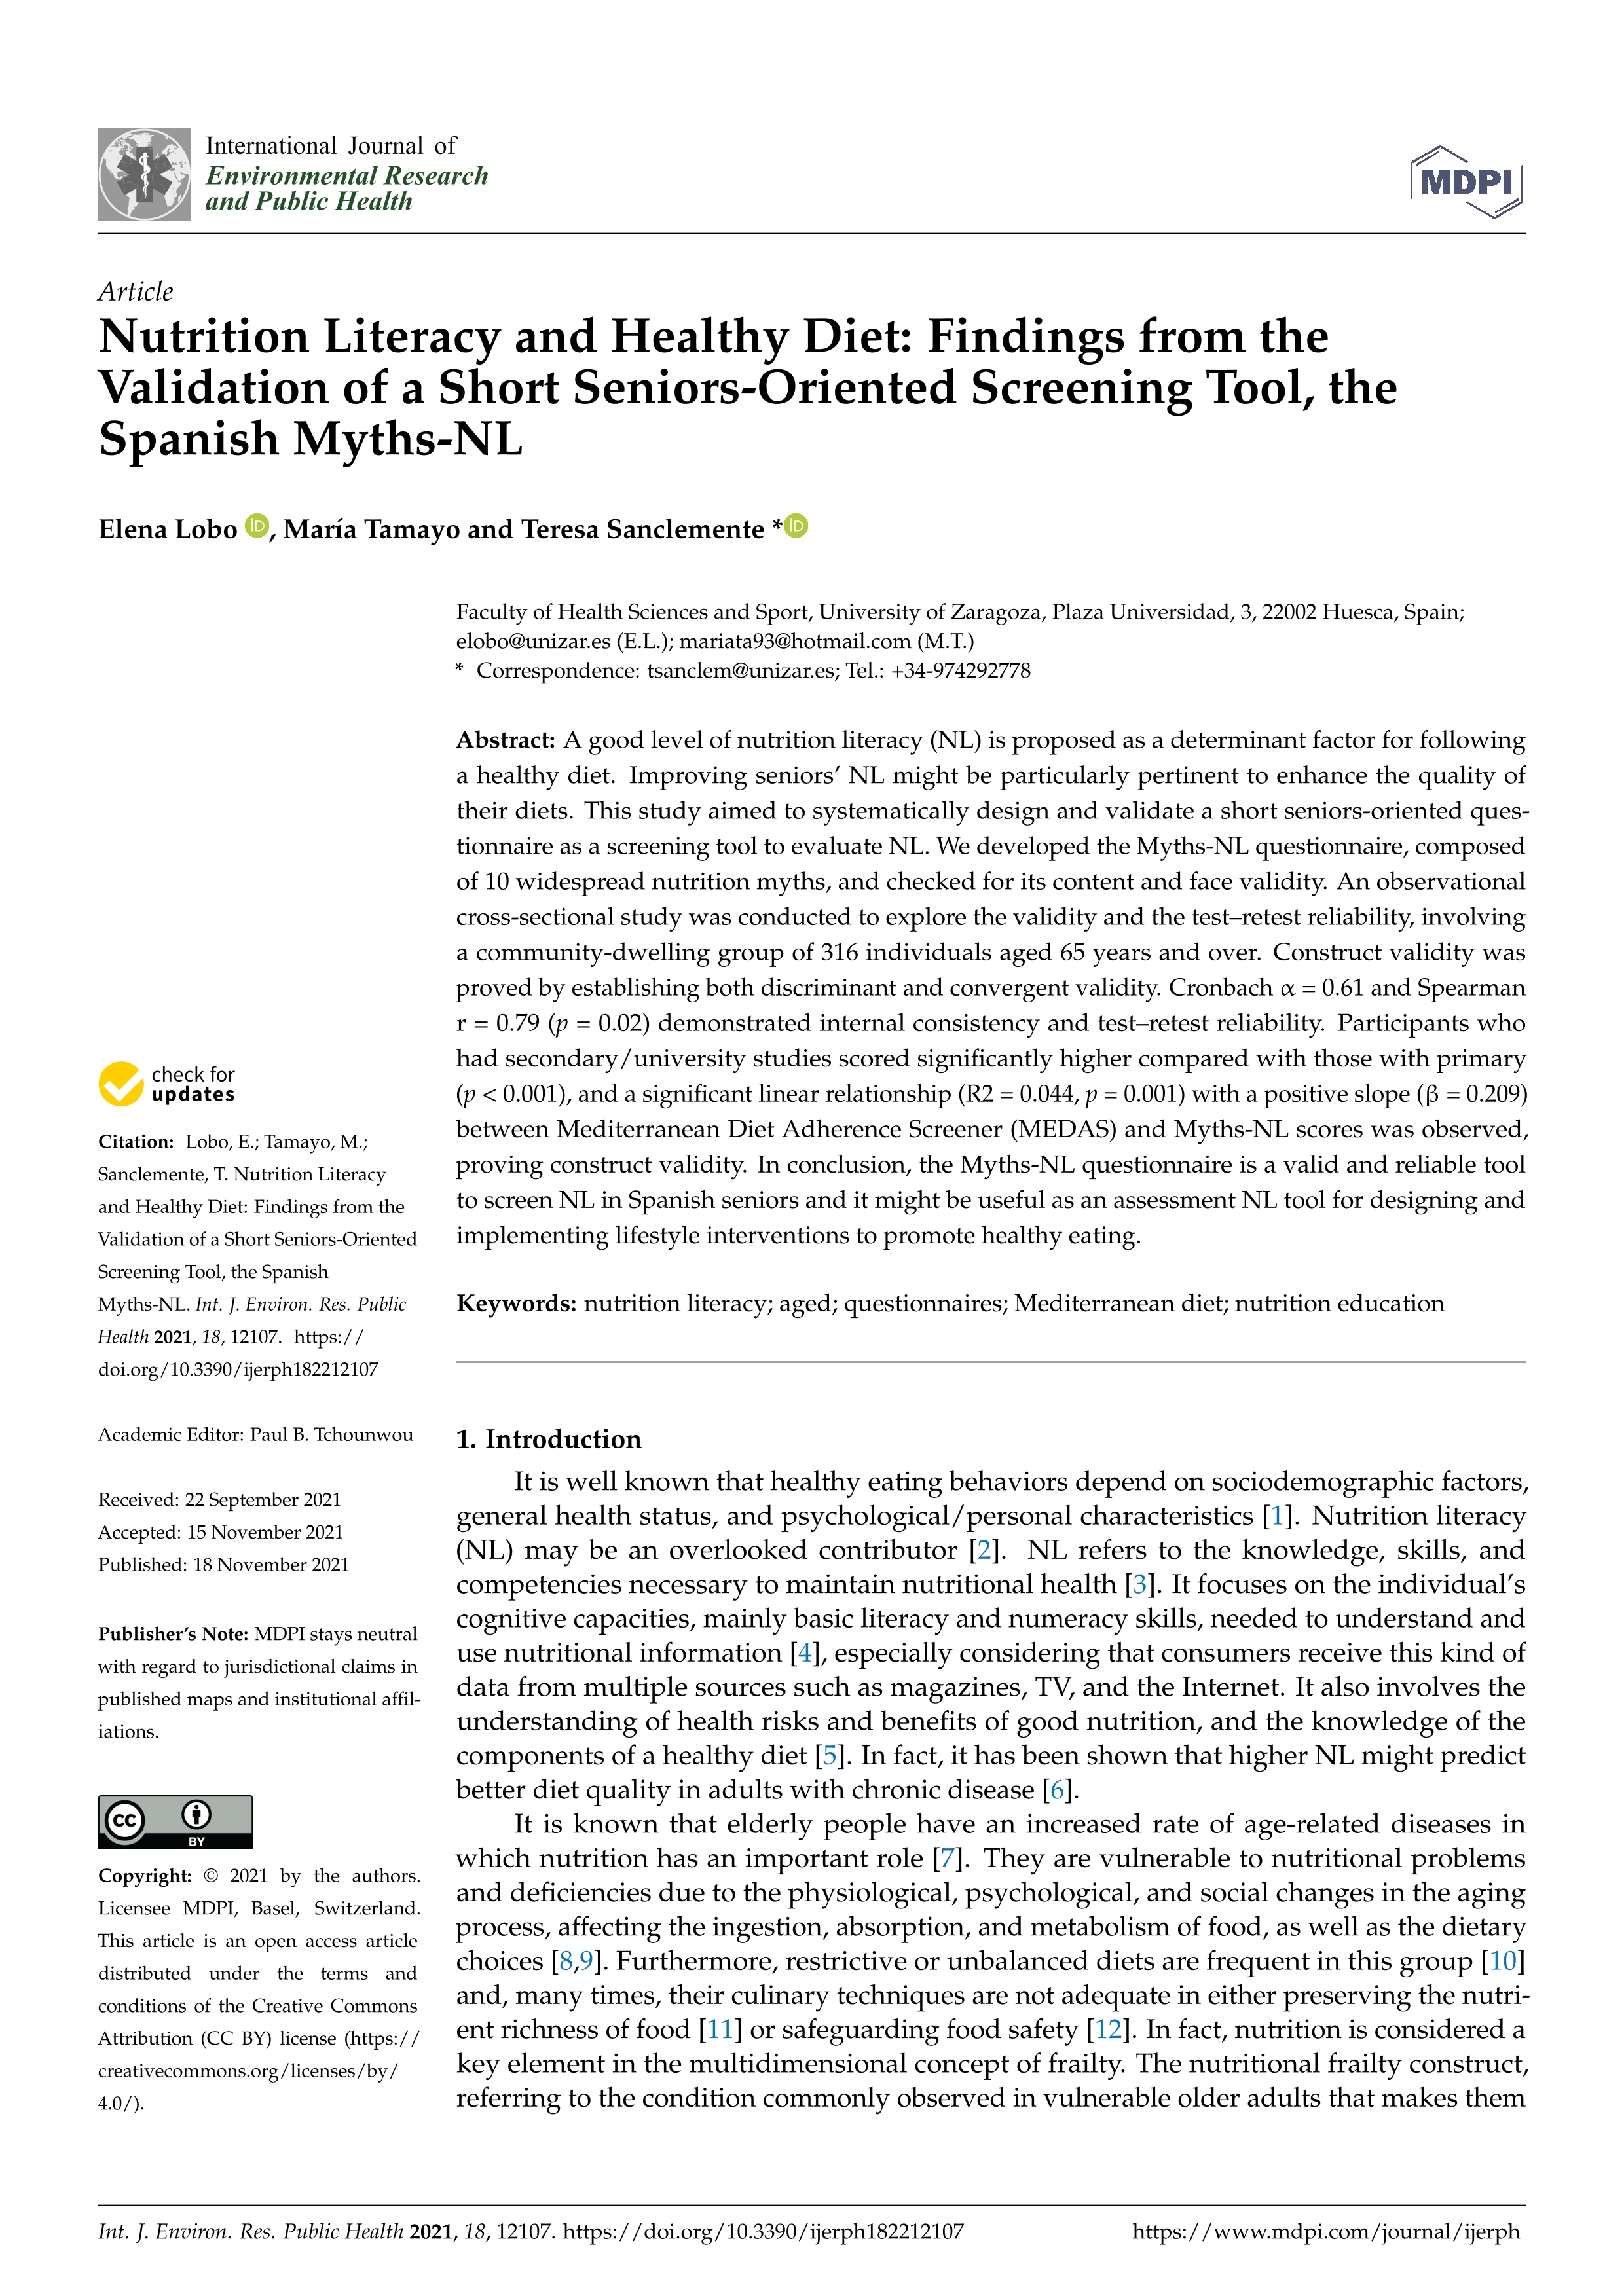 Nutrition literacy and healthy diet: findings from the validation of a short seniors-oriented screening tool, the Spanish Myths-NL